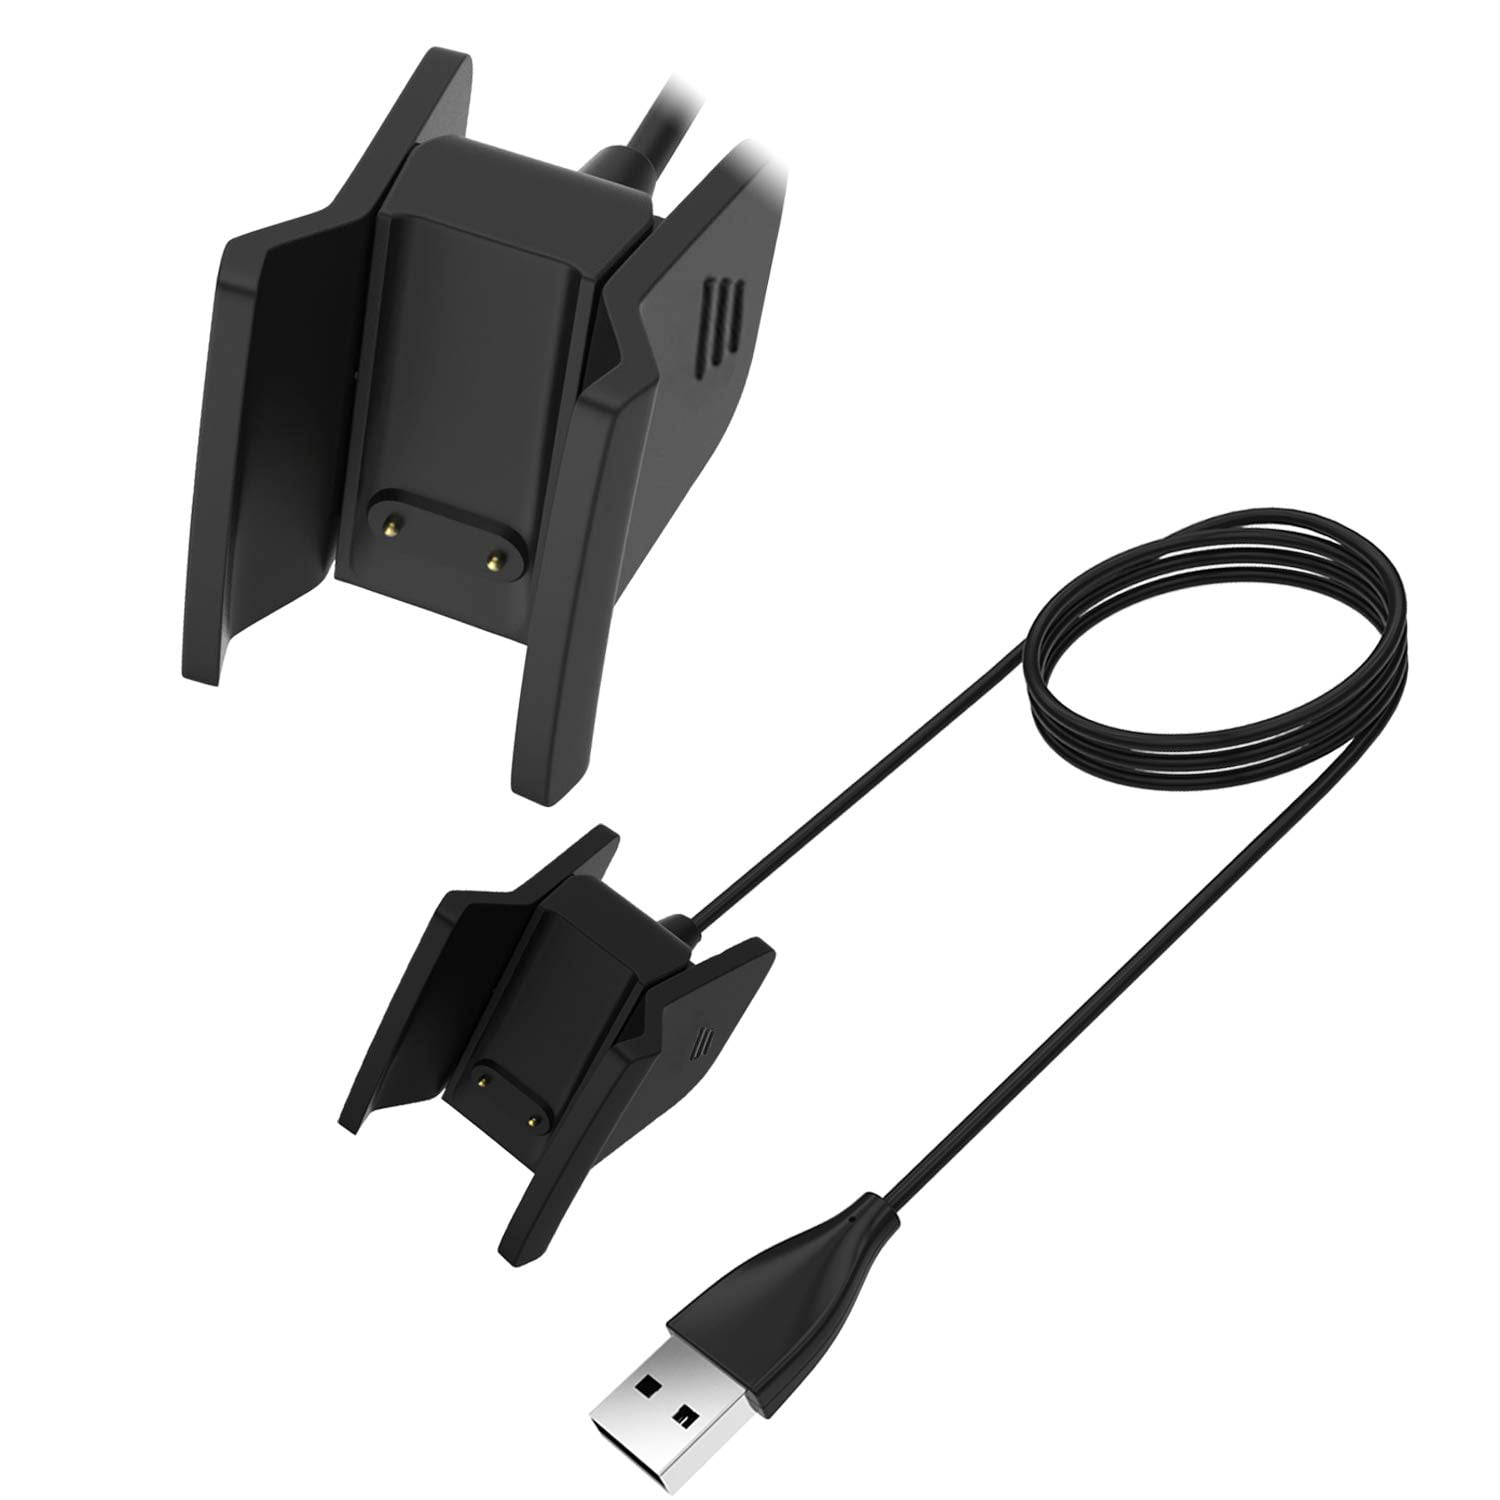 Replacement USB Dock Cable Adapter for 